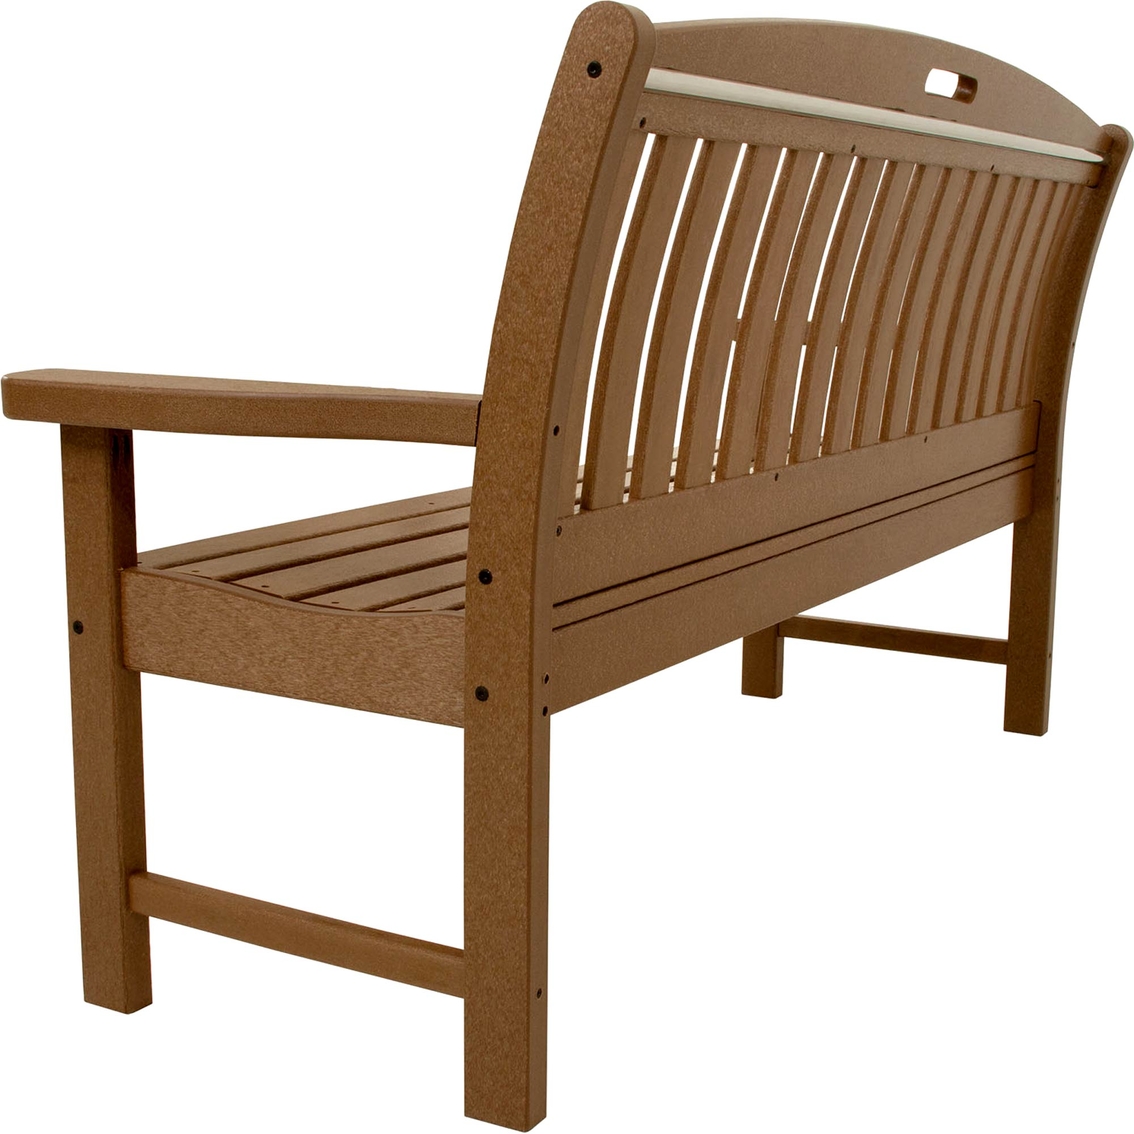 Hanover Outdoor Avalon 60 in. All Weather Bench, Teak - Image 2 of 2